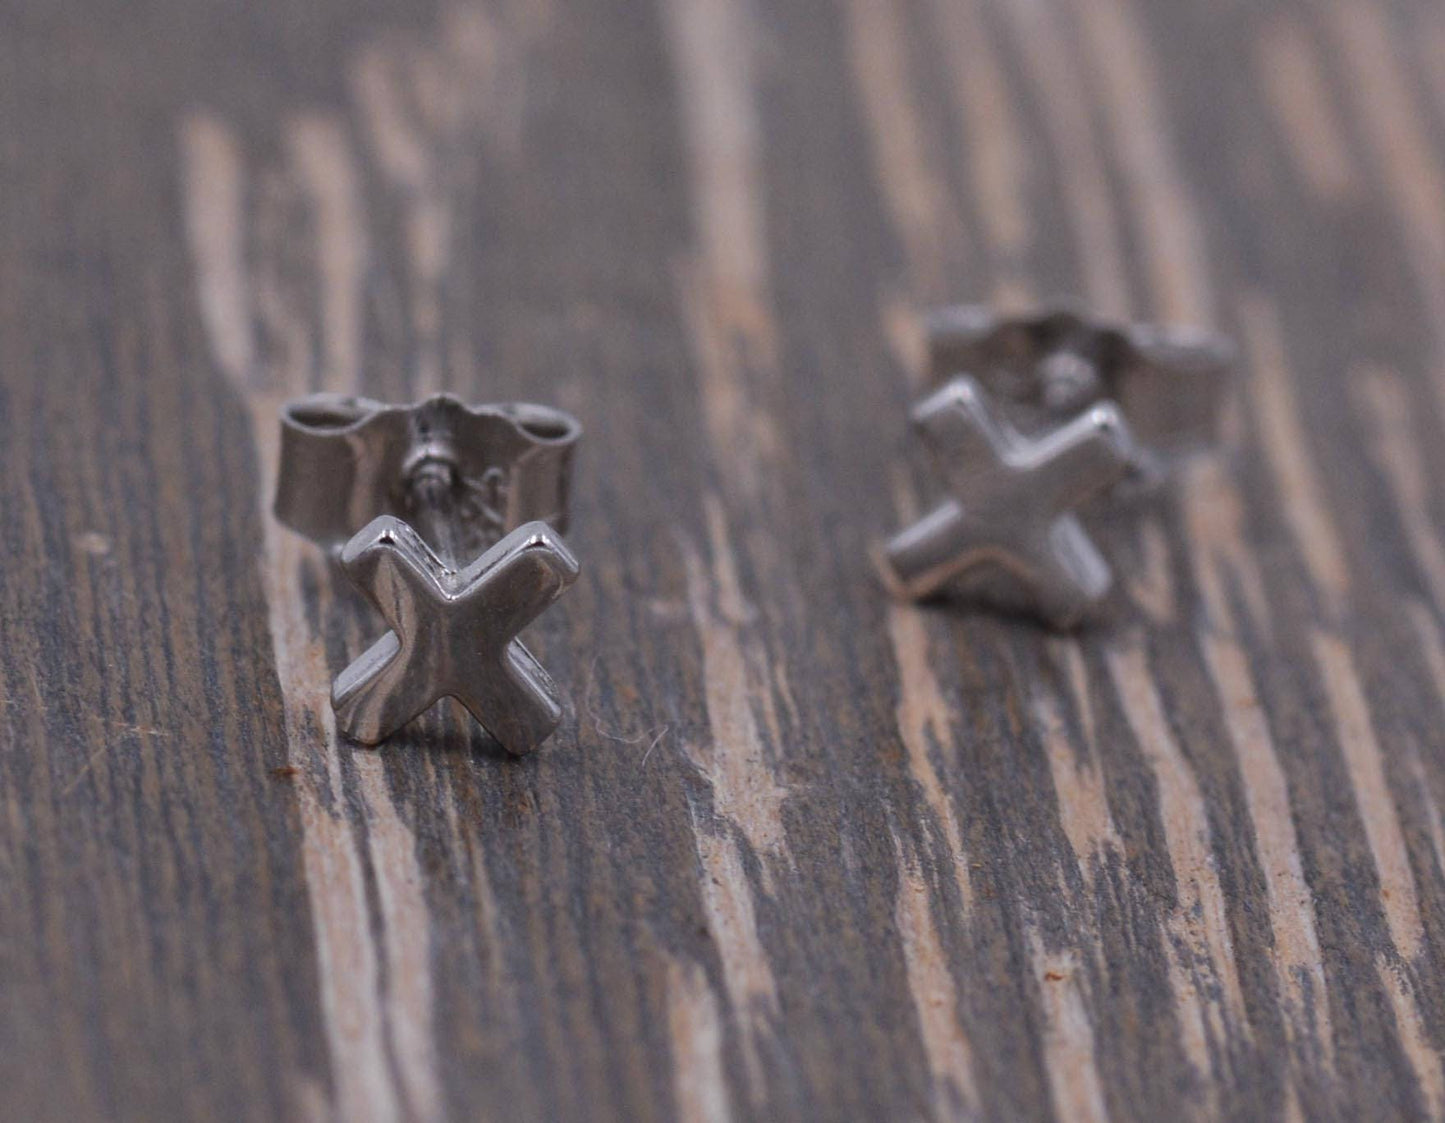 Sterling Silver Tiny Little Crosses Cross xx Kiss Stud Earrings, Dainty and Discreet, Simple and Minimalist Design, Geometric